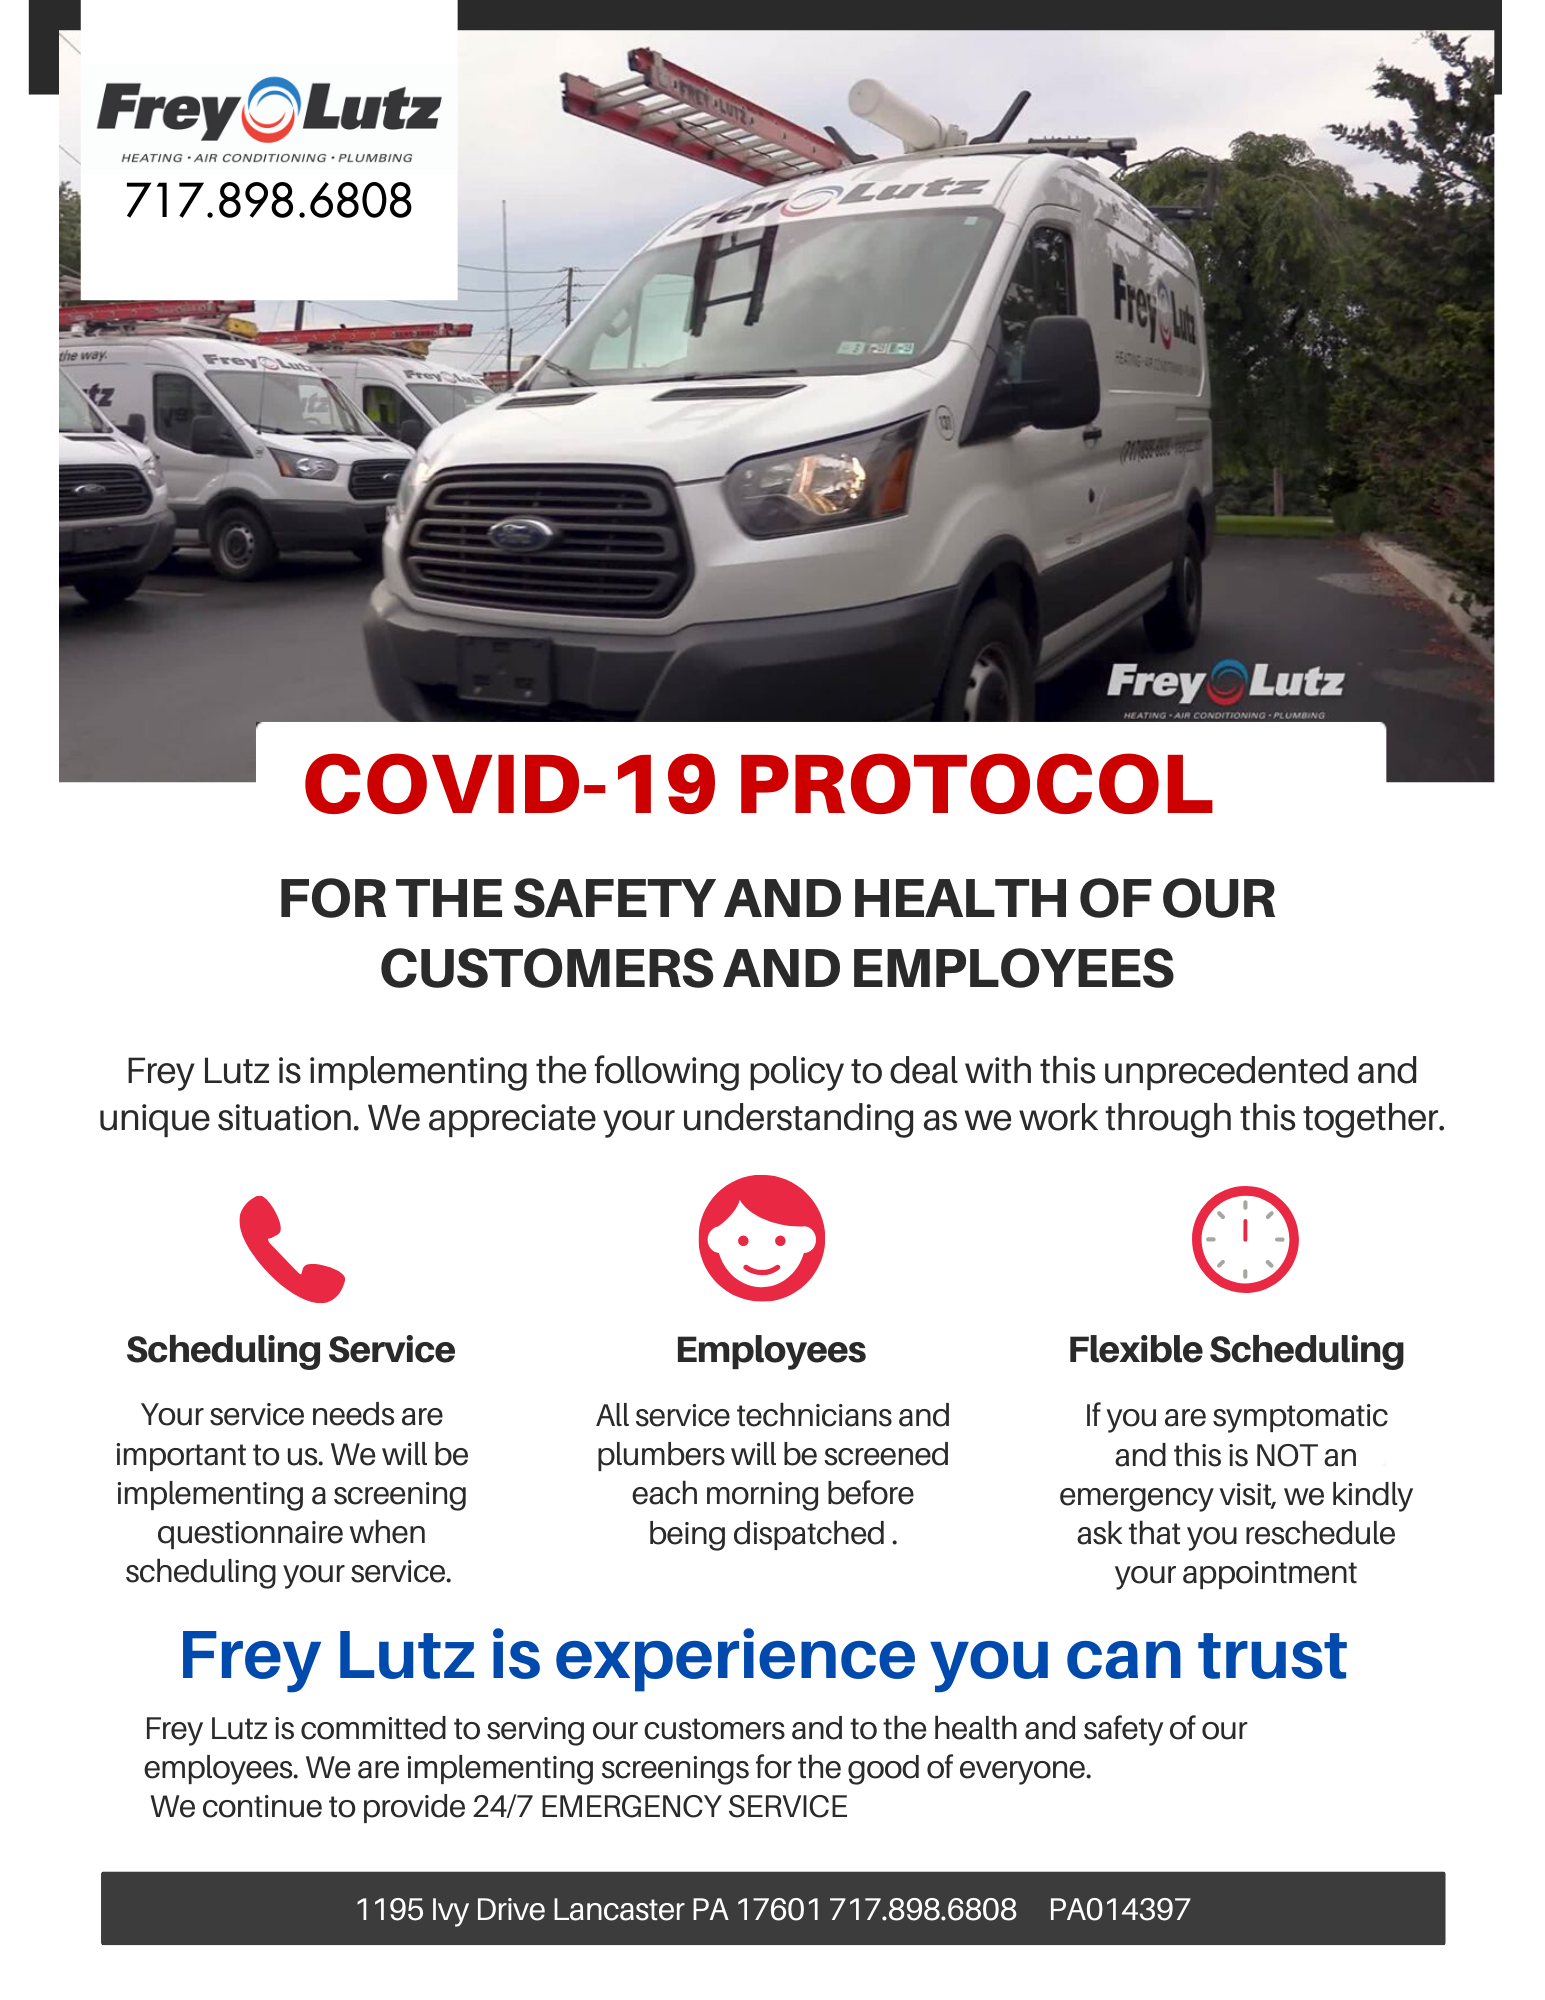 Covid 19 Protocol Keeping Our Customers And Employees Safe Frey Lutz